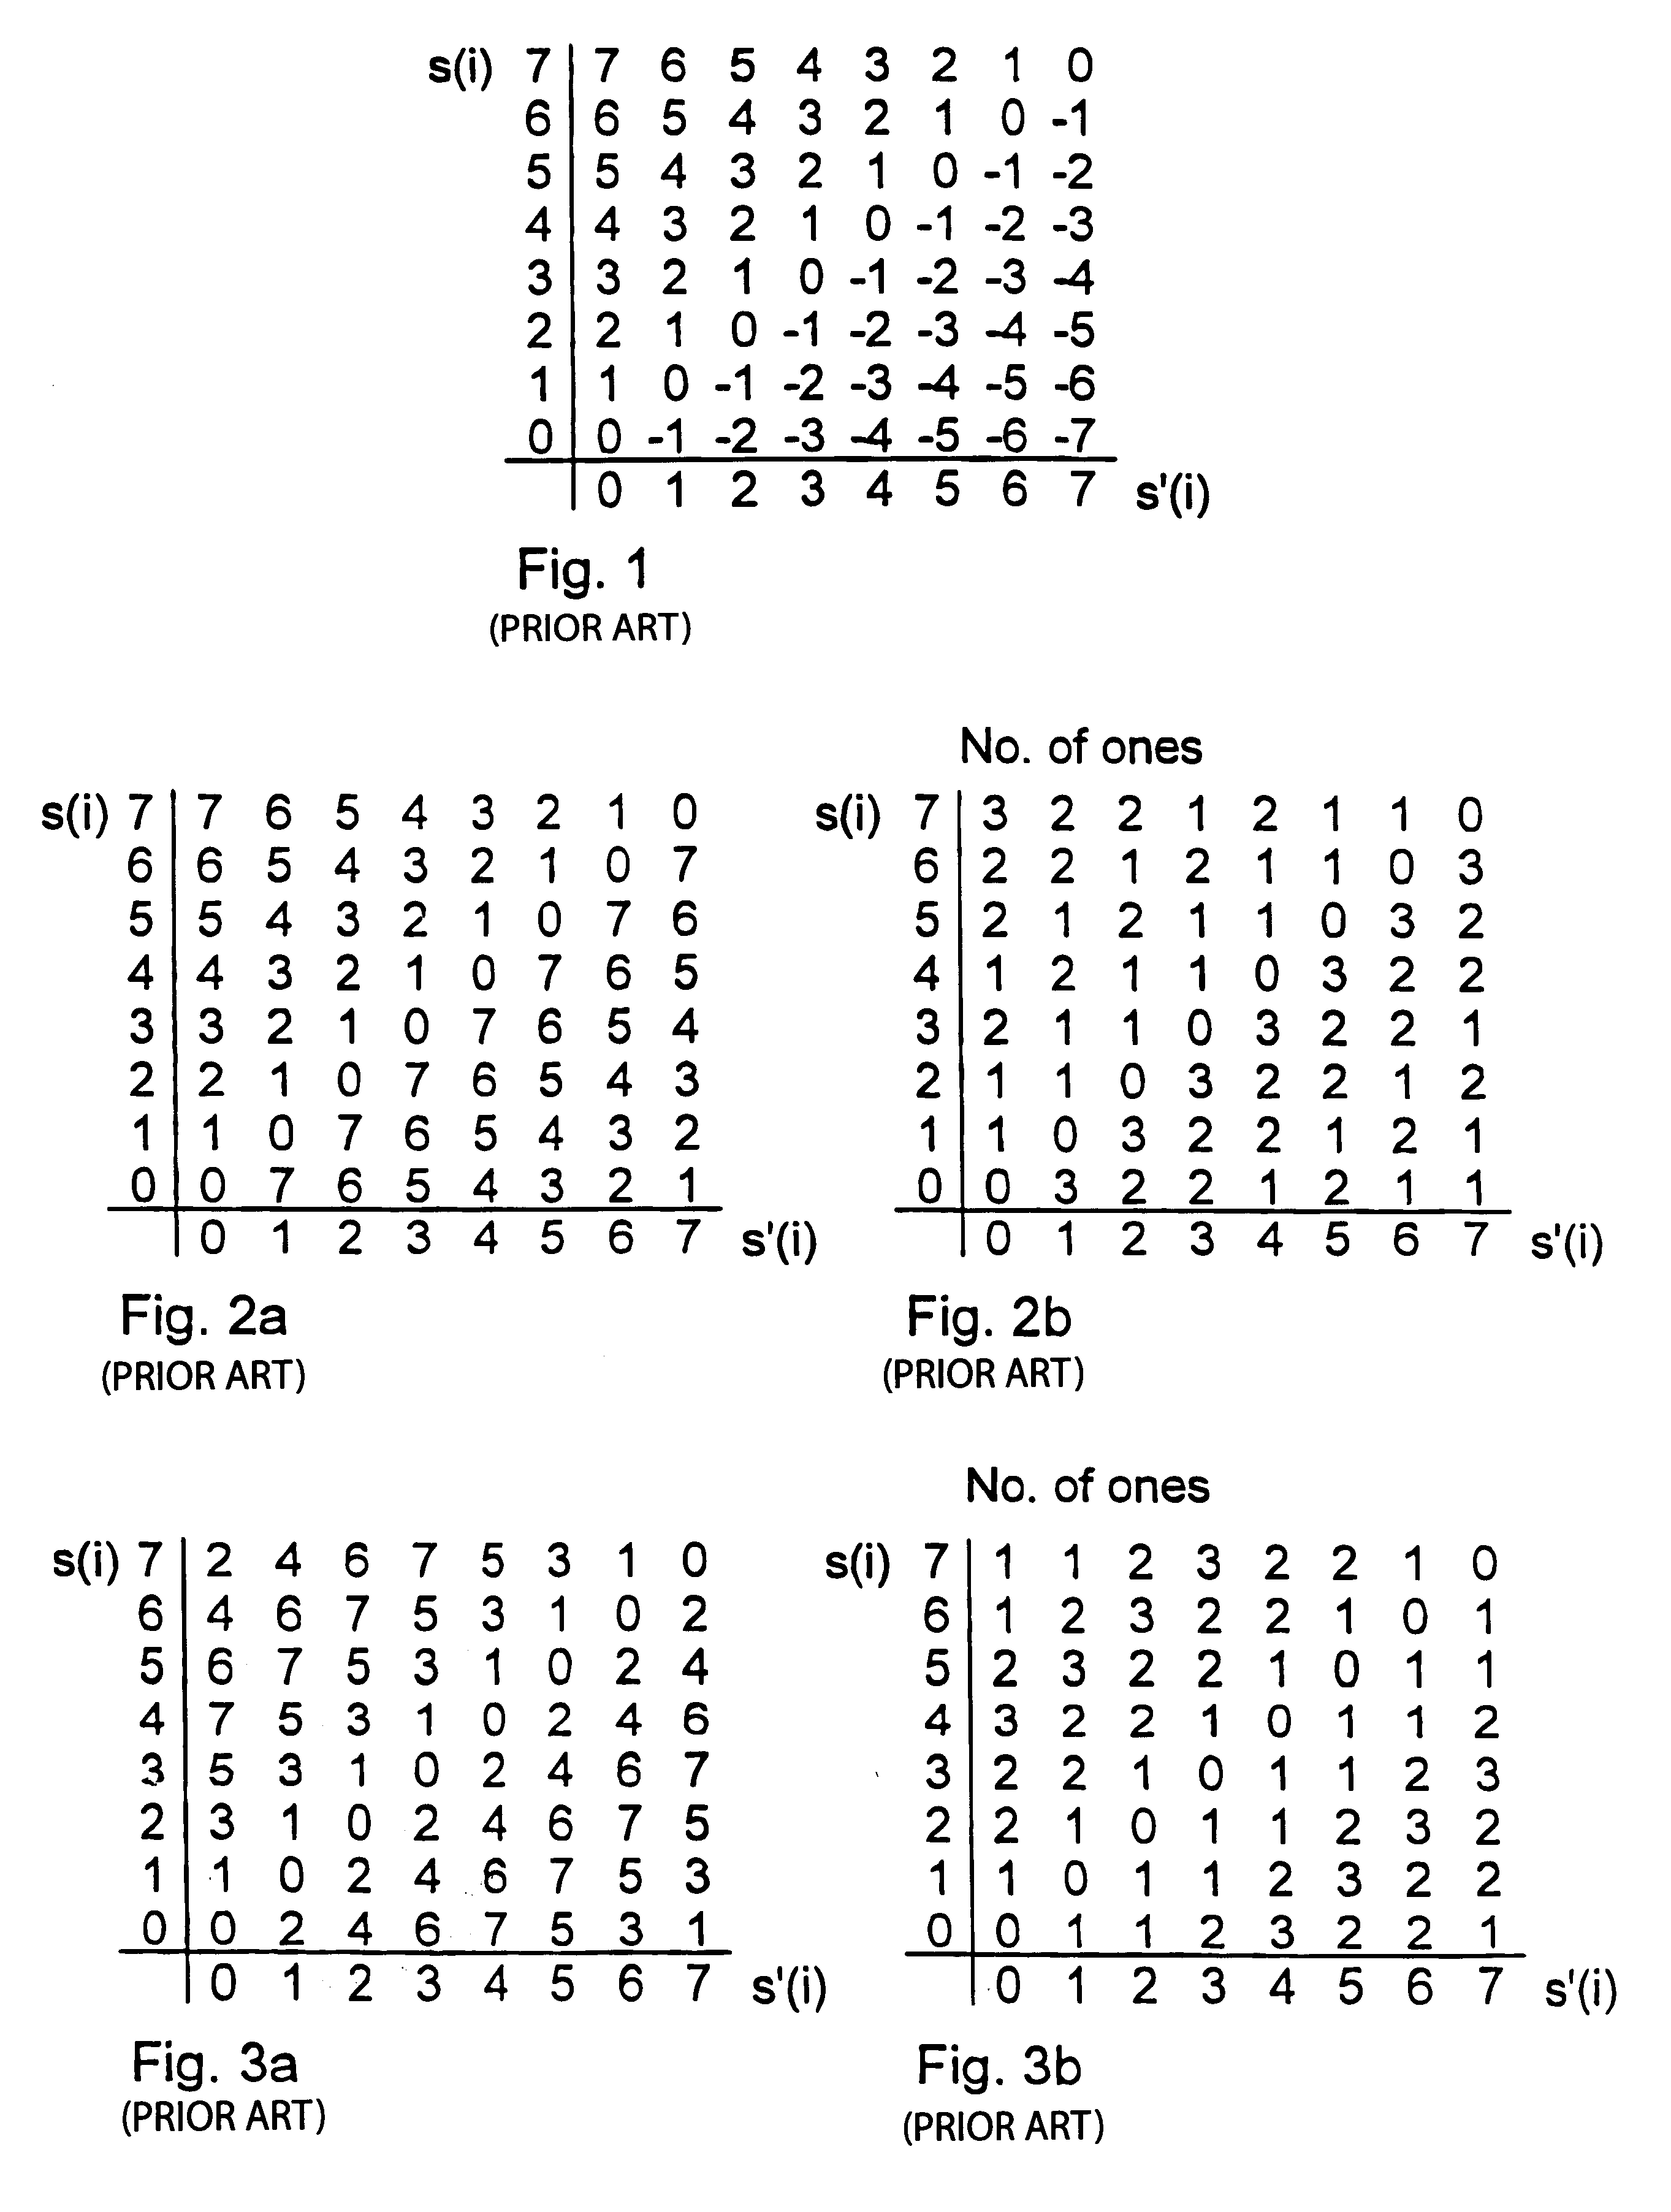 Non-reversible differential predictive compression using lossy or lossless tables